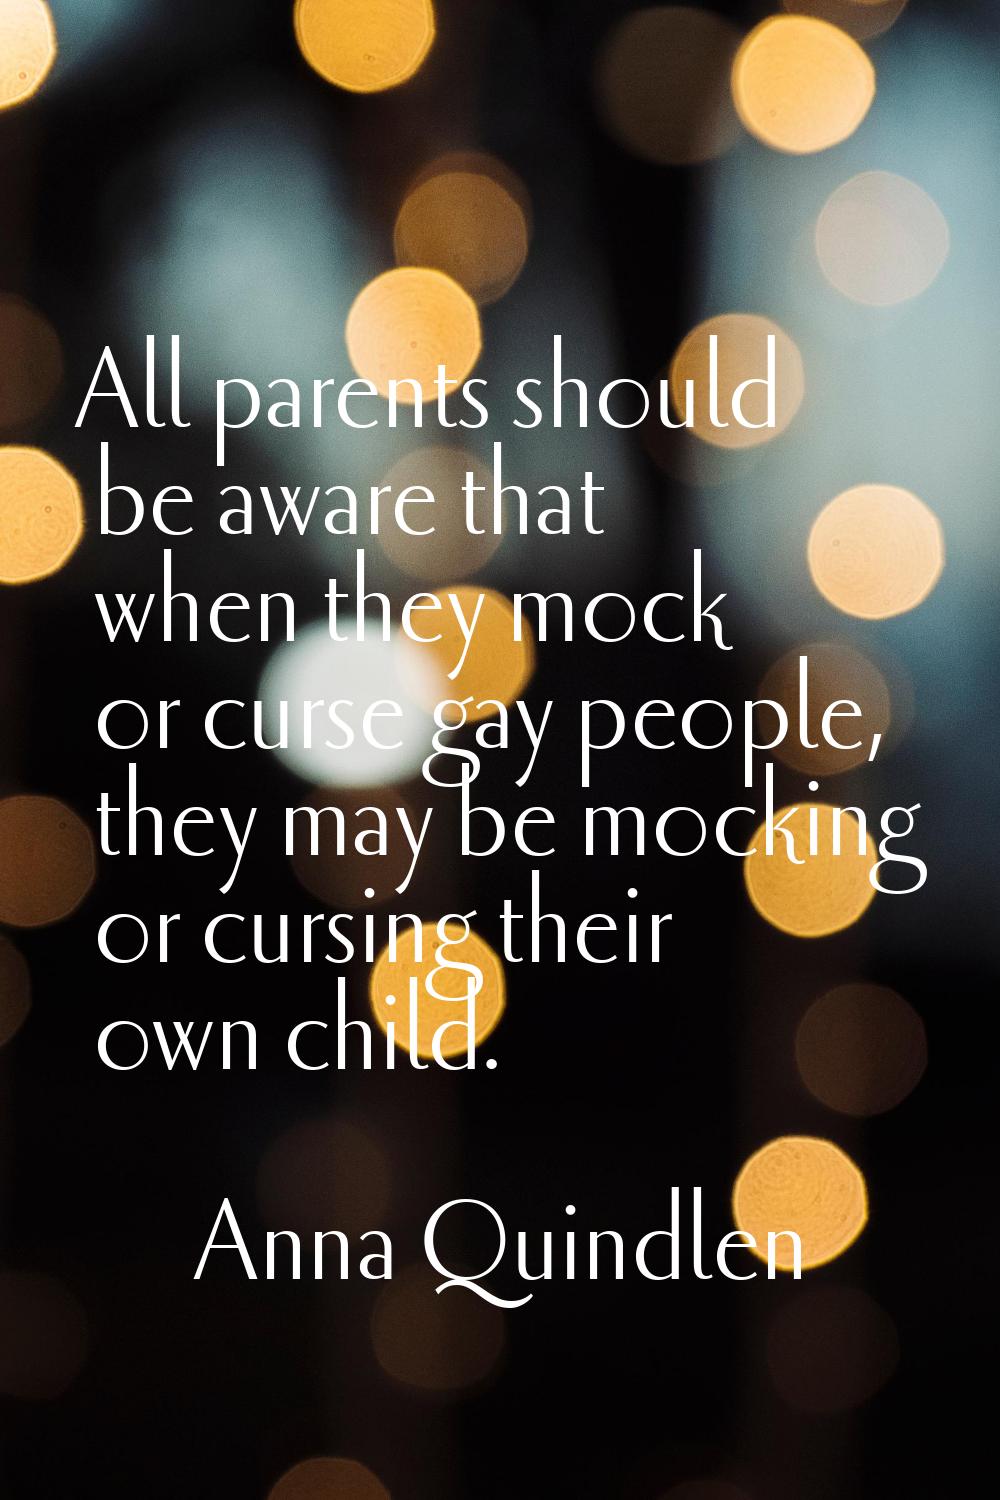 All parents should be aware that when they mock or curse gay people, they may be mocking or cursing